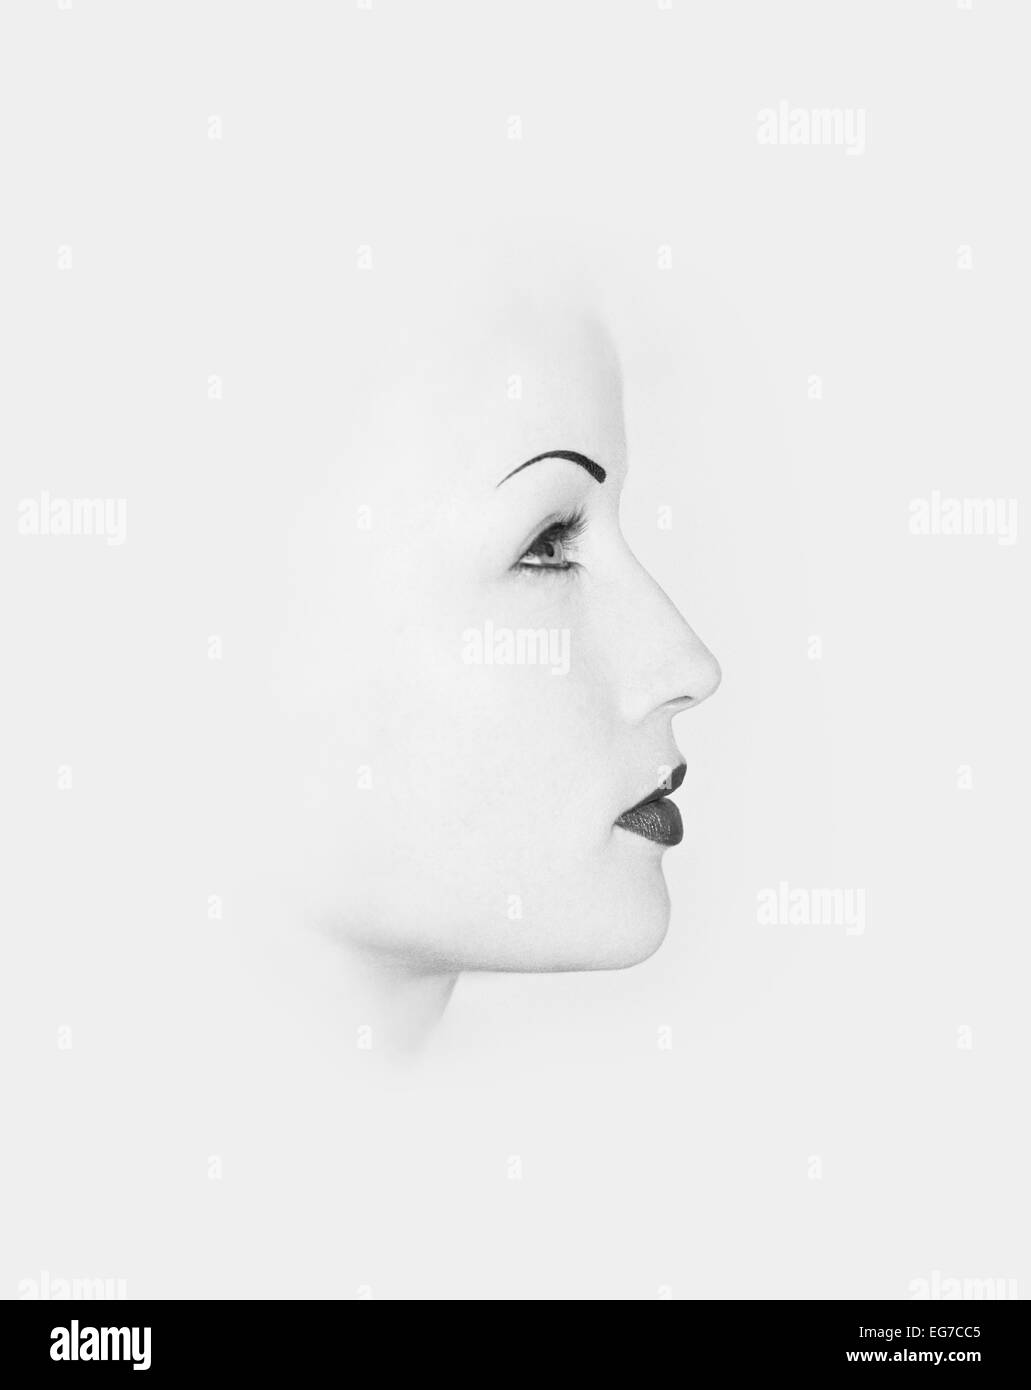 A cut out of a young 'goth' or gothic woman's profile against white background Stock Photo